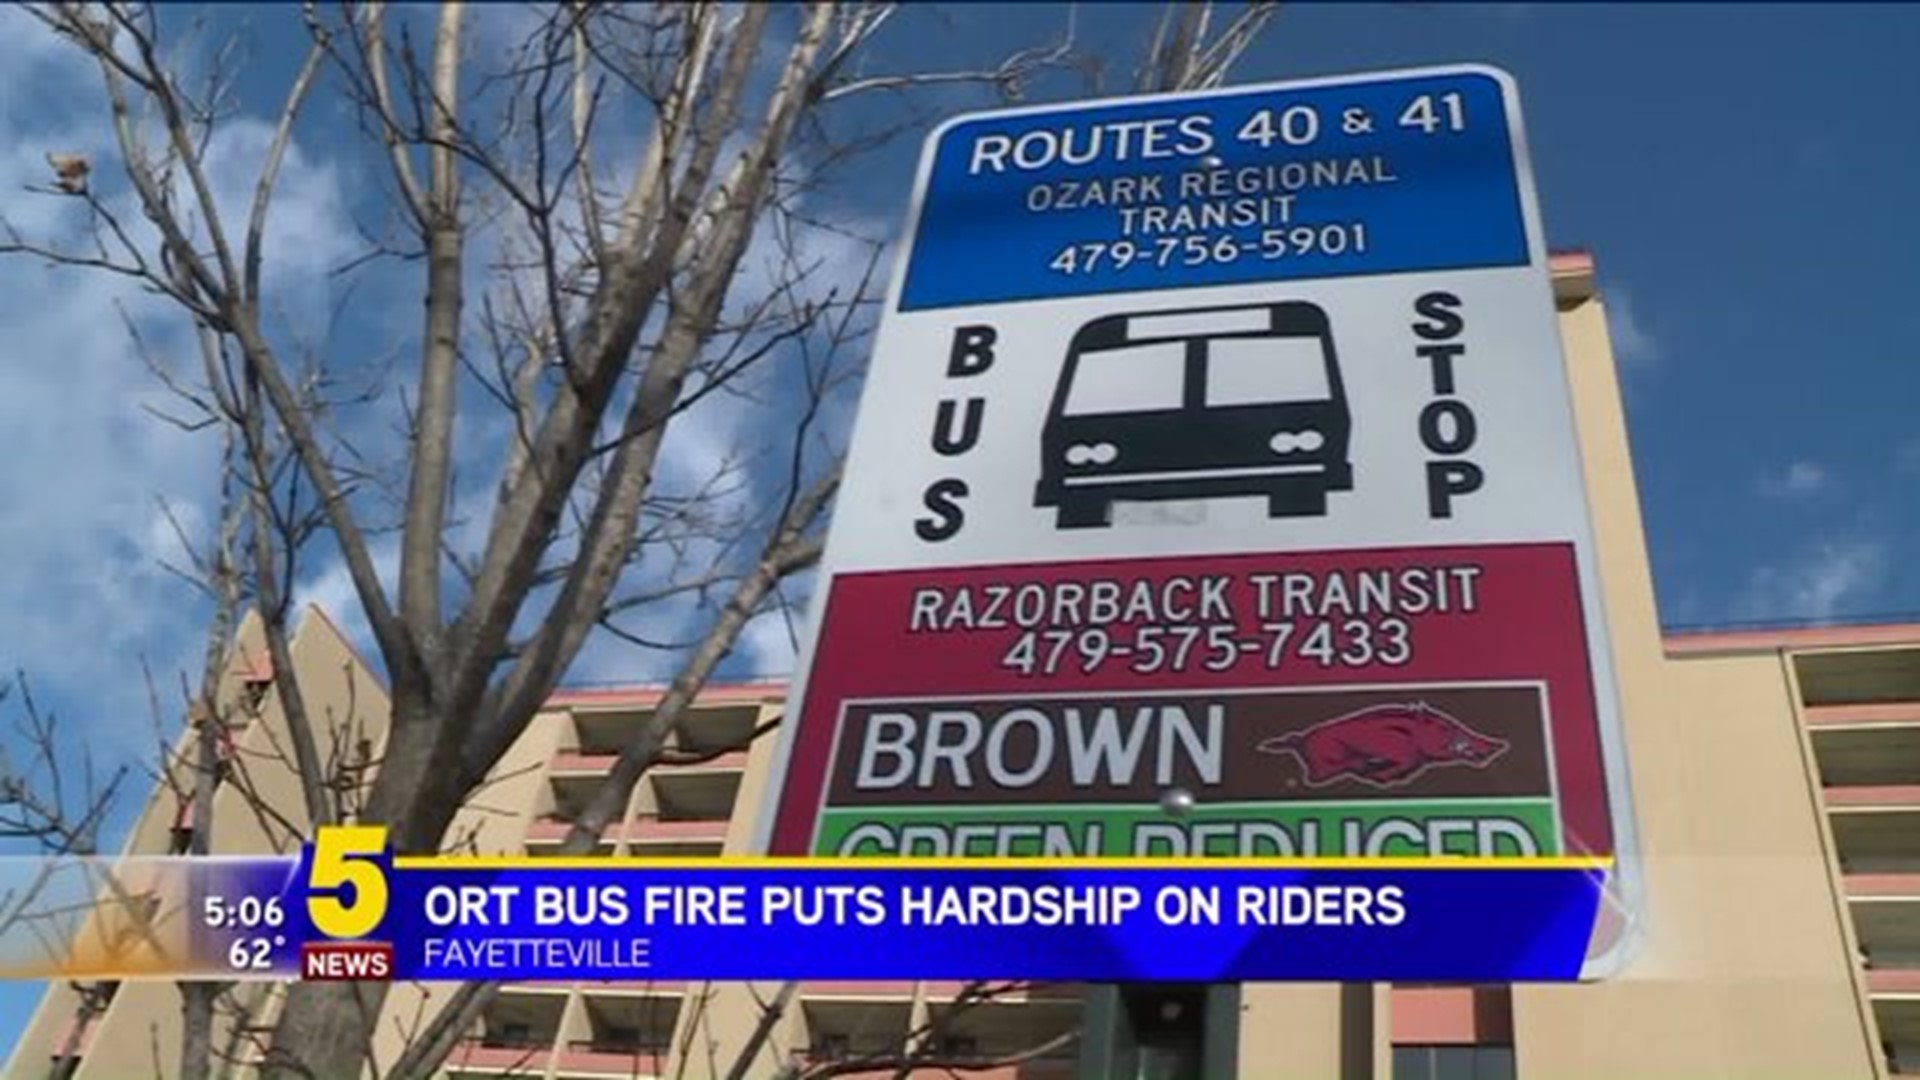 ORT BUS FIRE LEAVES RIDERS WITH HARDSHIP